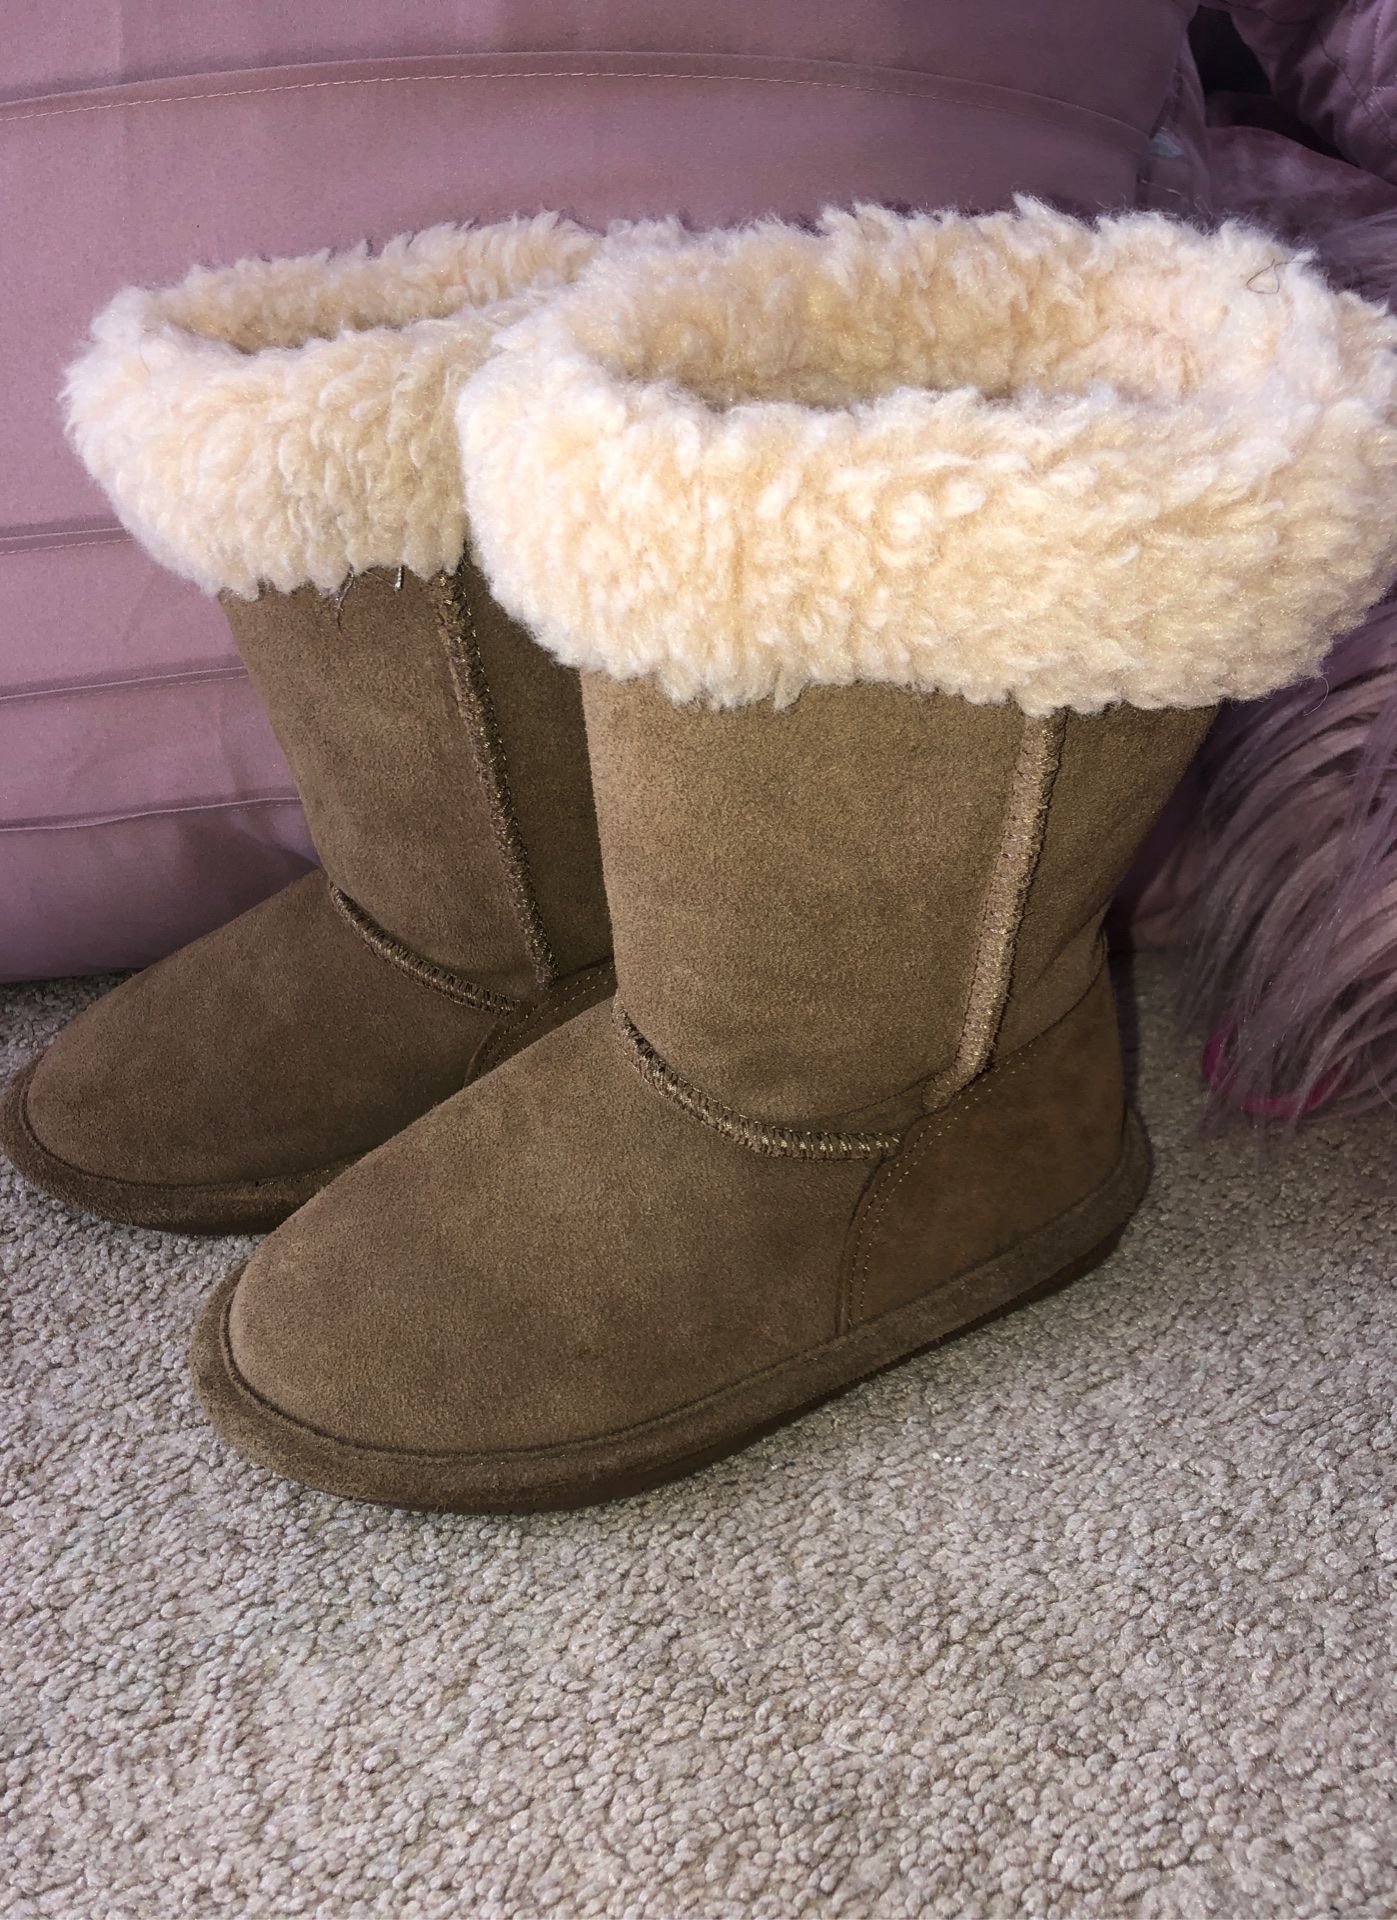 Girls Boots Size 1